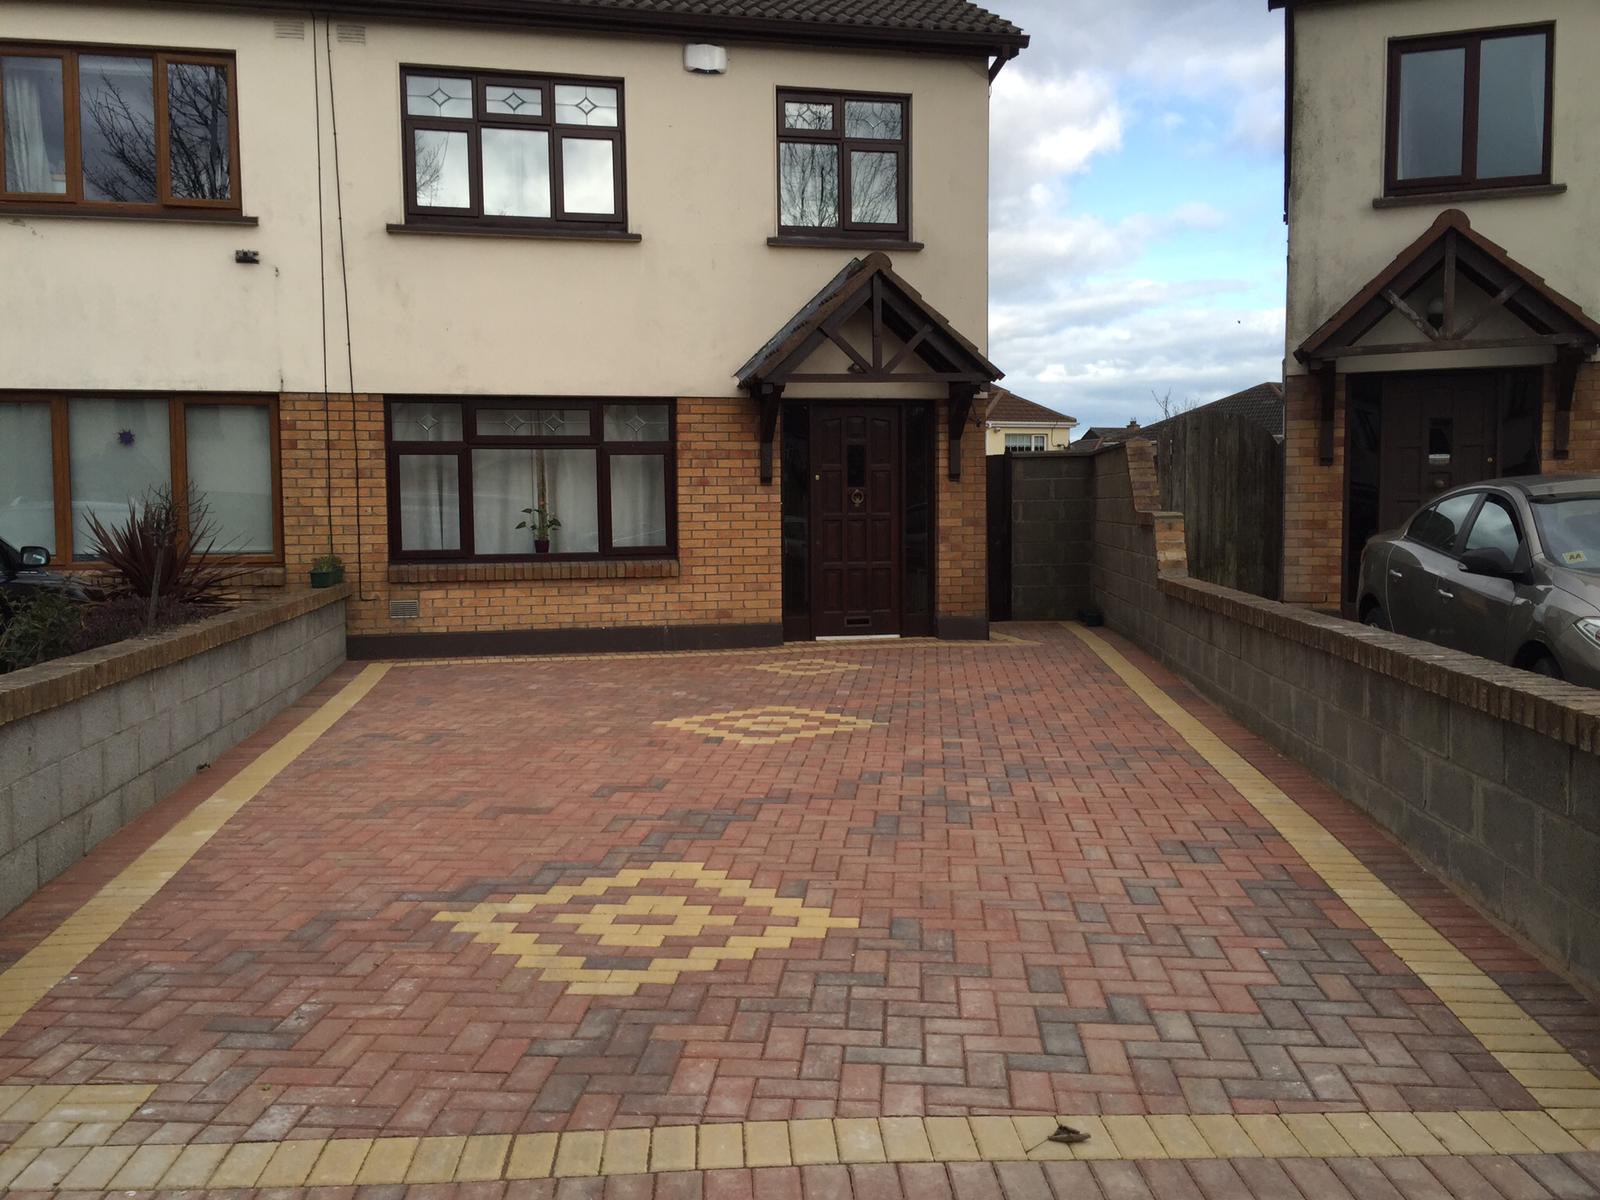 Paving in Dublin with contrasting paving border